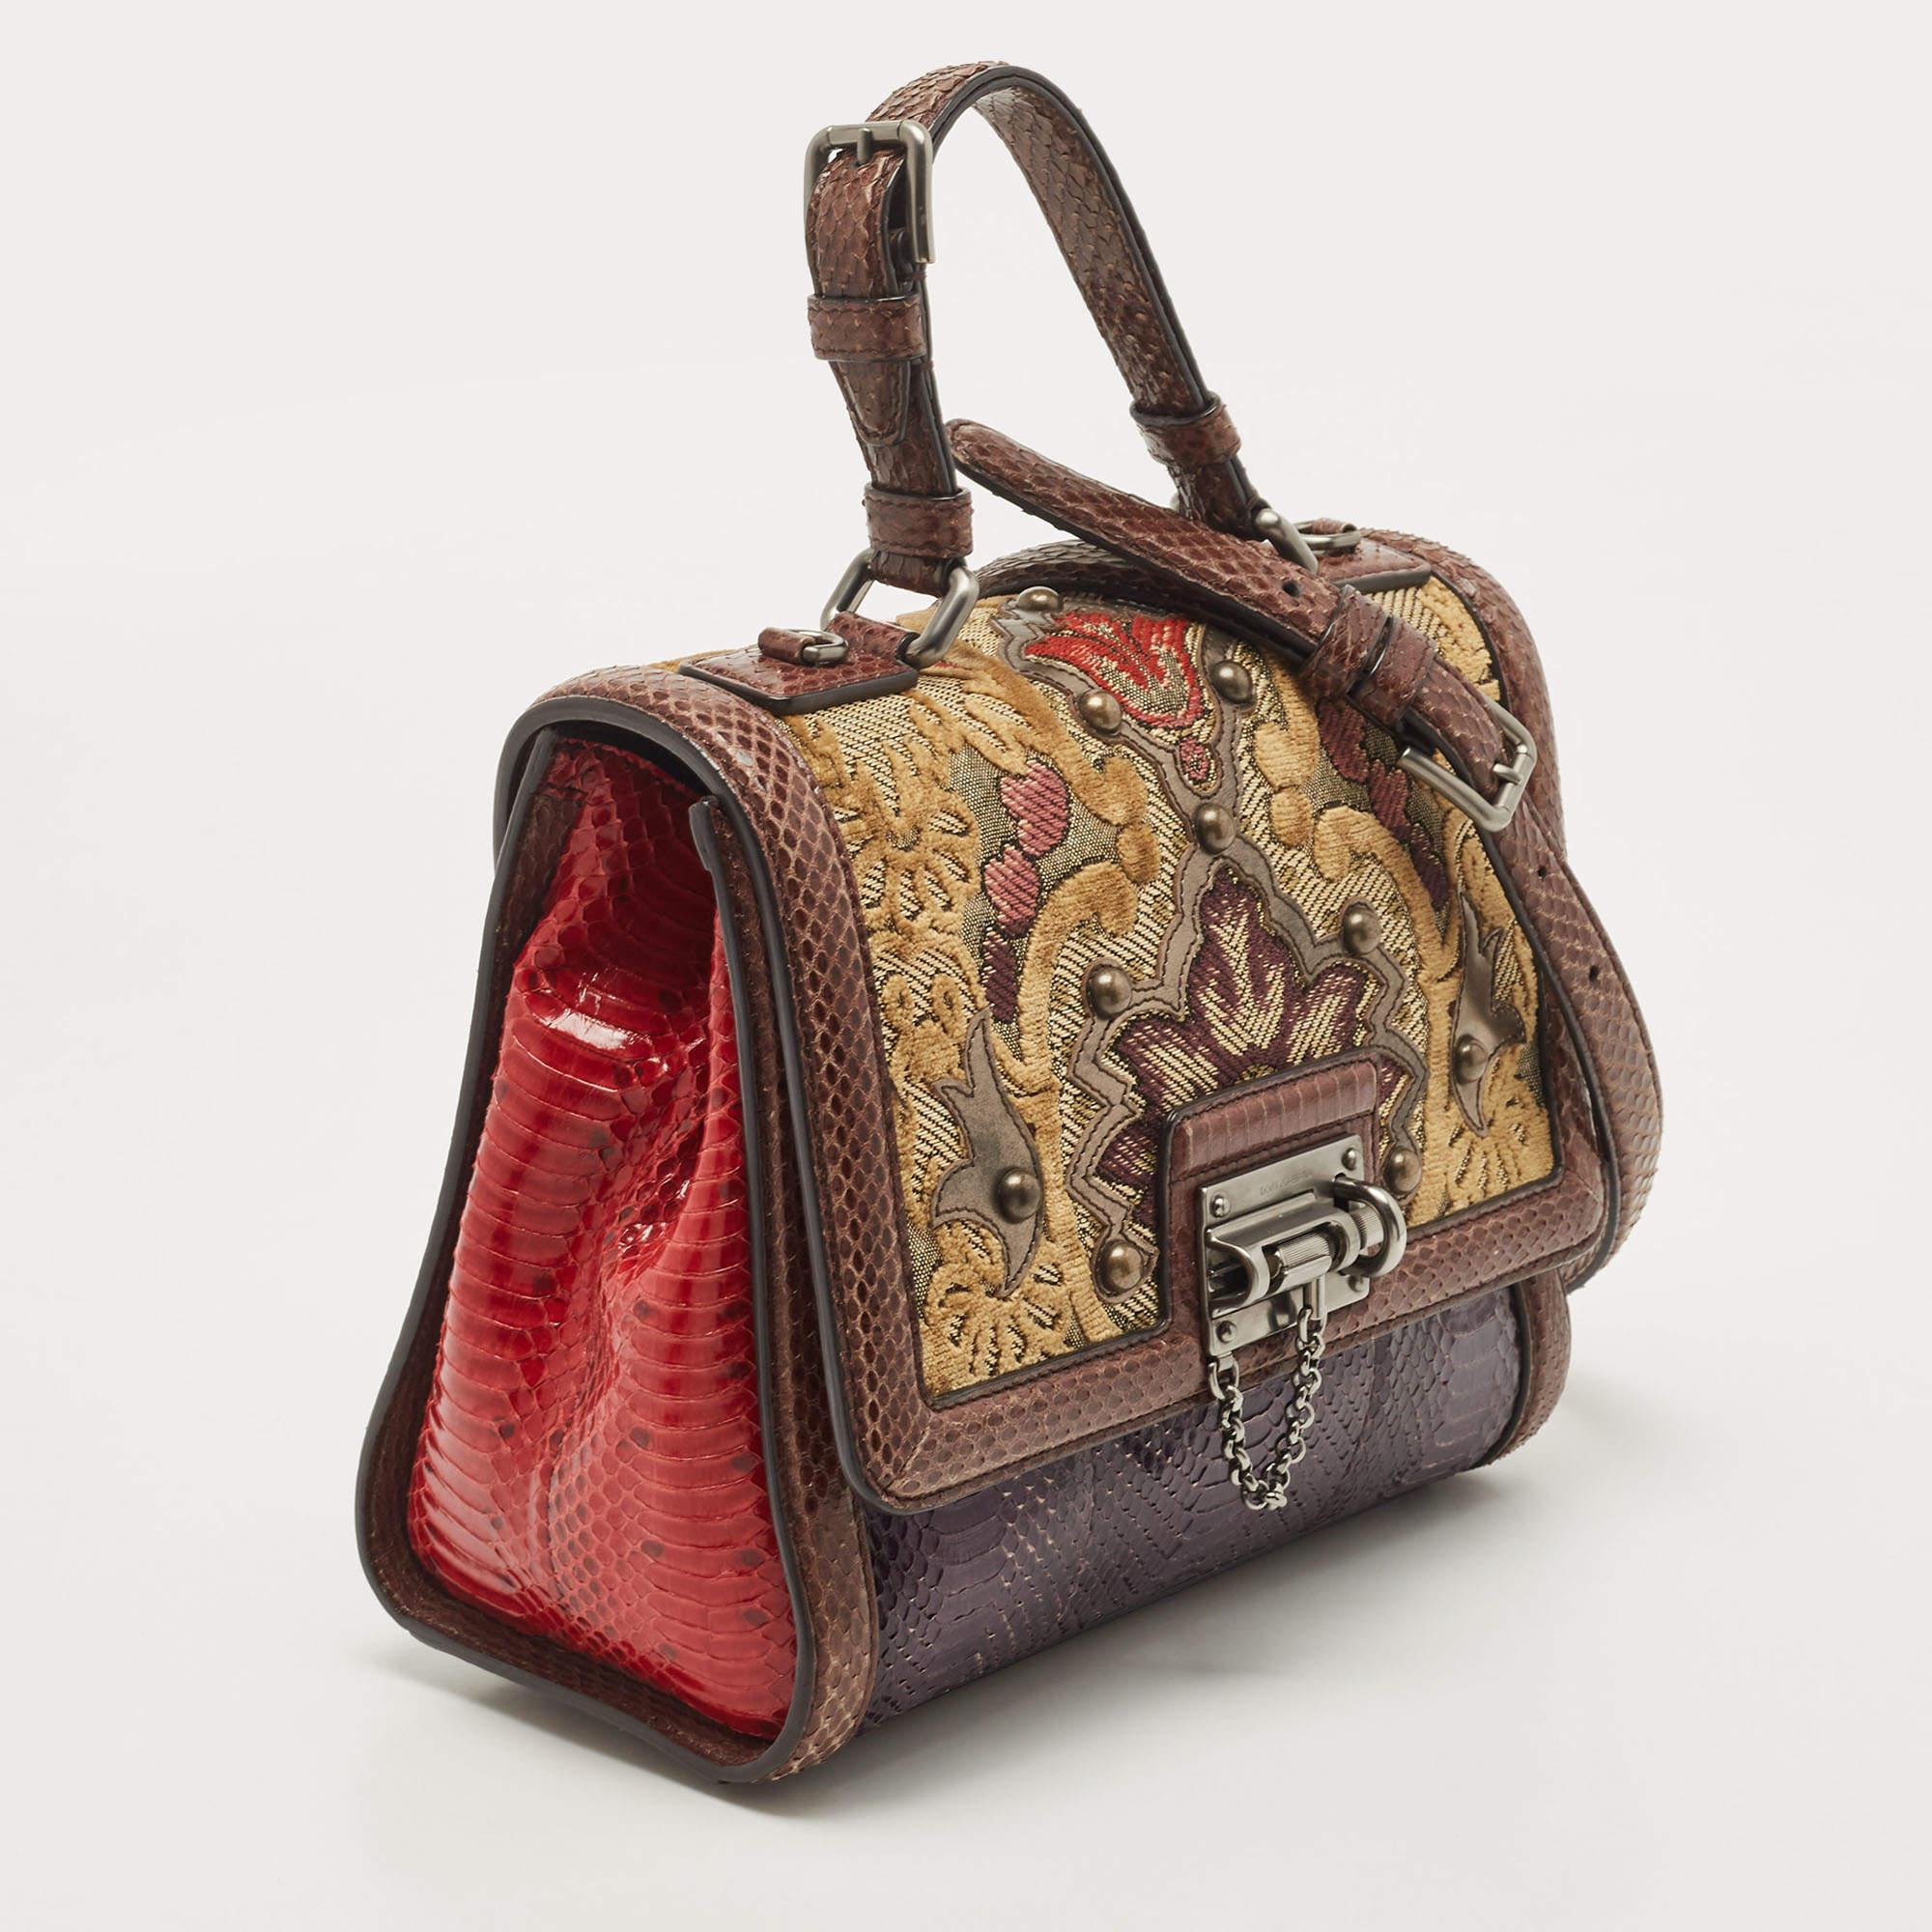 Brown Dolce & Gabbana Multicolor Watersnake Leather and Brocade Fabric Top Handle Bag